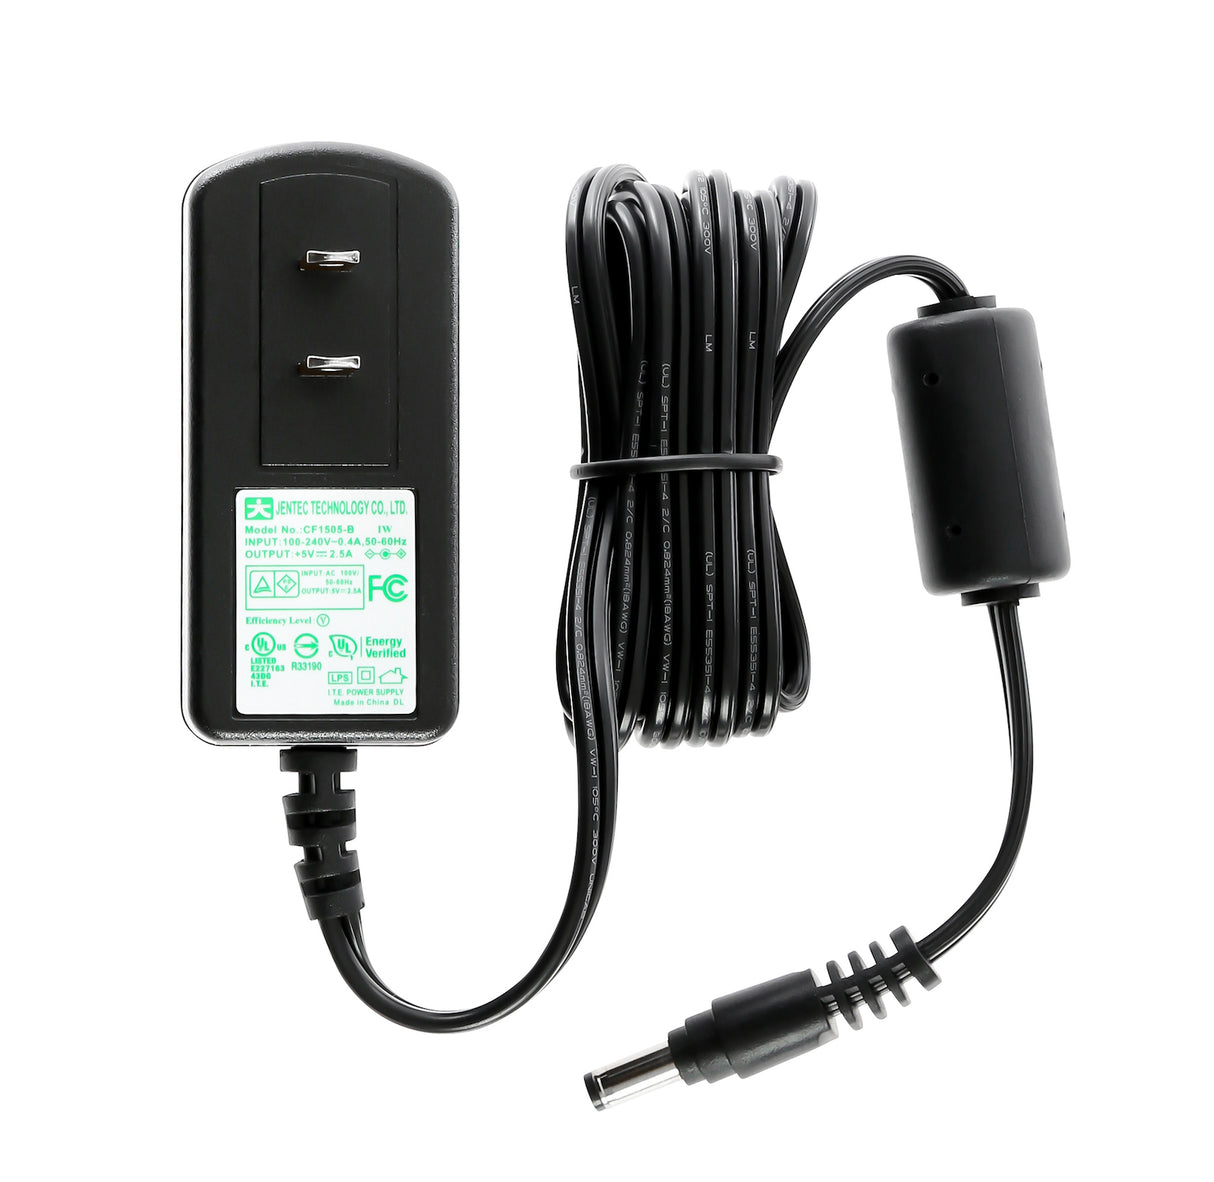 weBoost 470101 Home 4G Signal Booster Kit - Power Supply